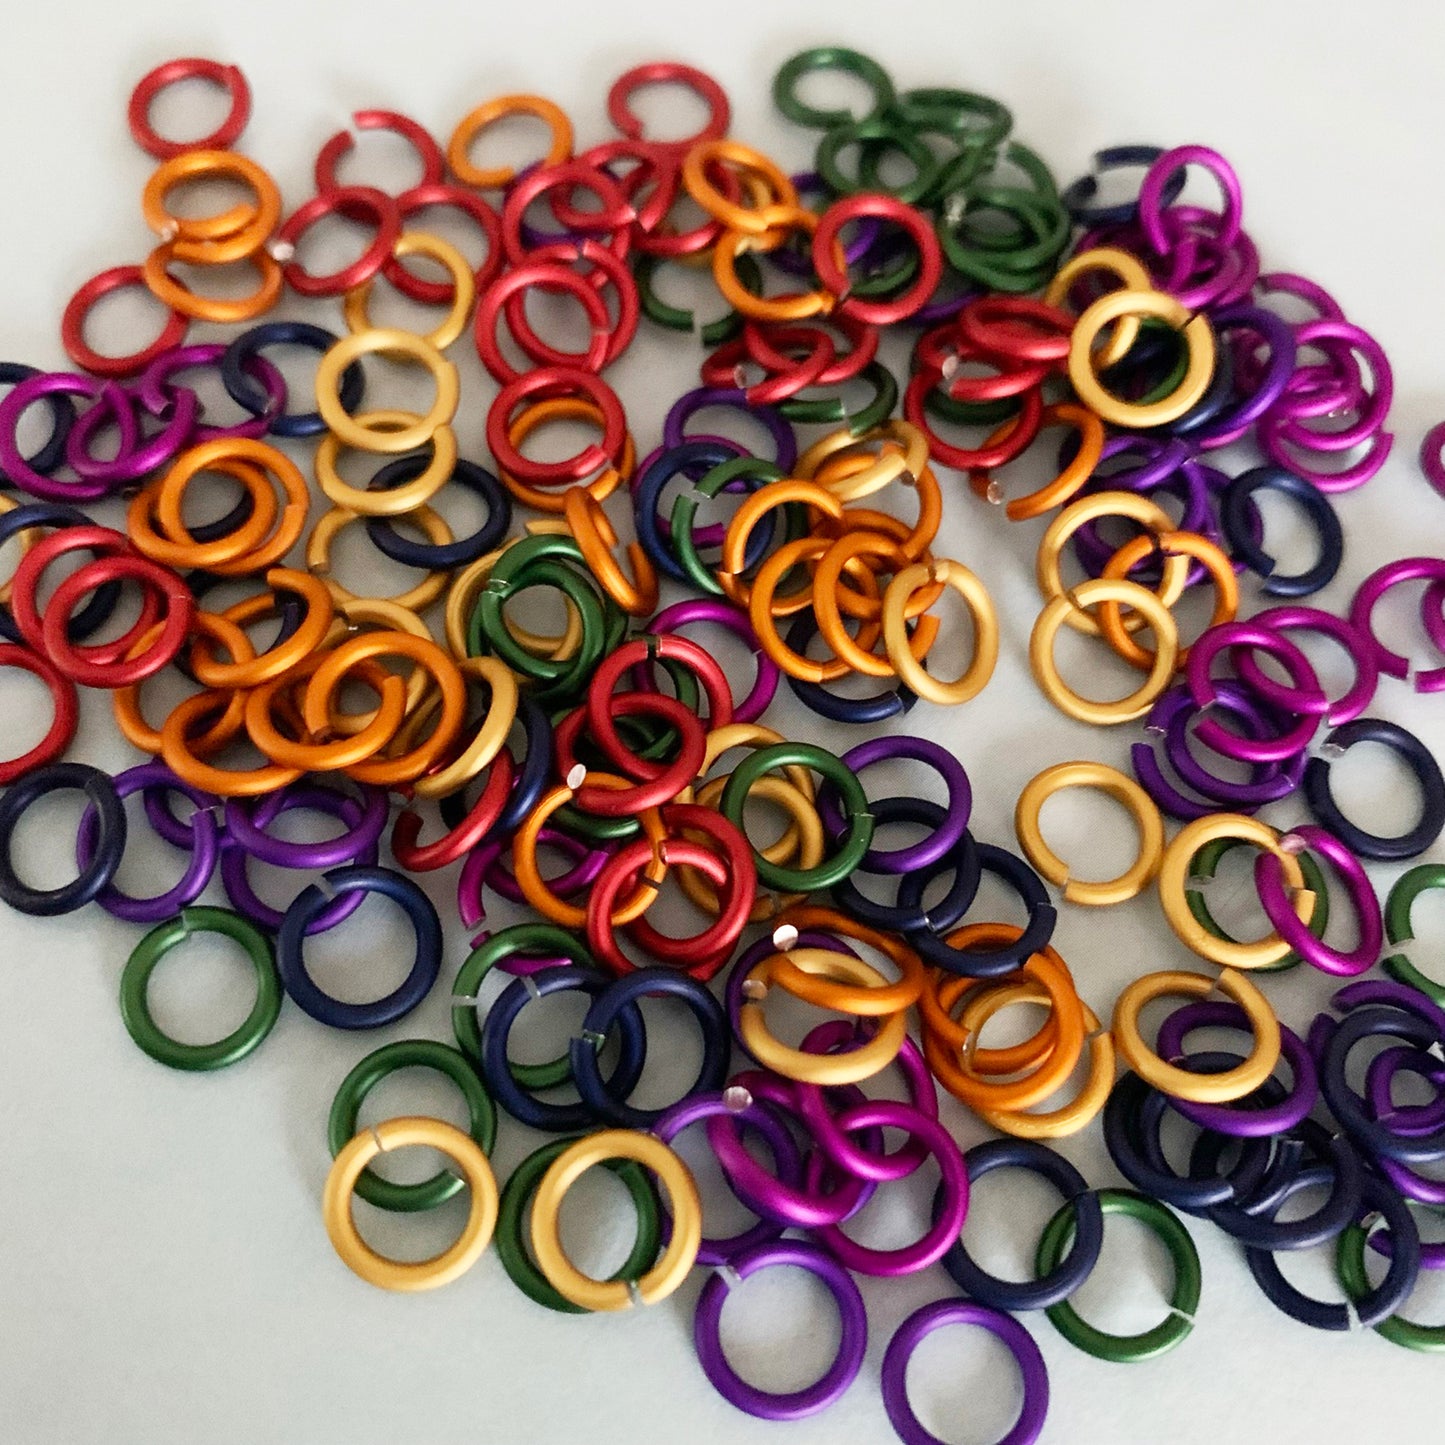 18g 3/16" Jump Rings Rainbow Mixed - hand picked- choose matte or shiny